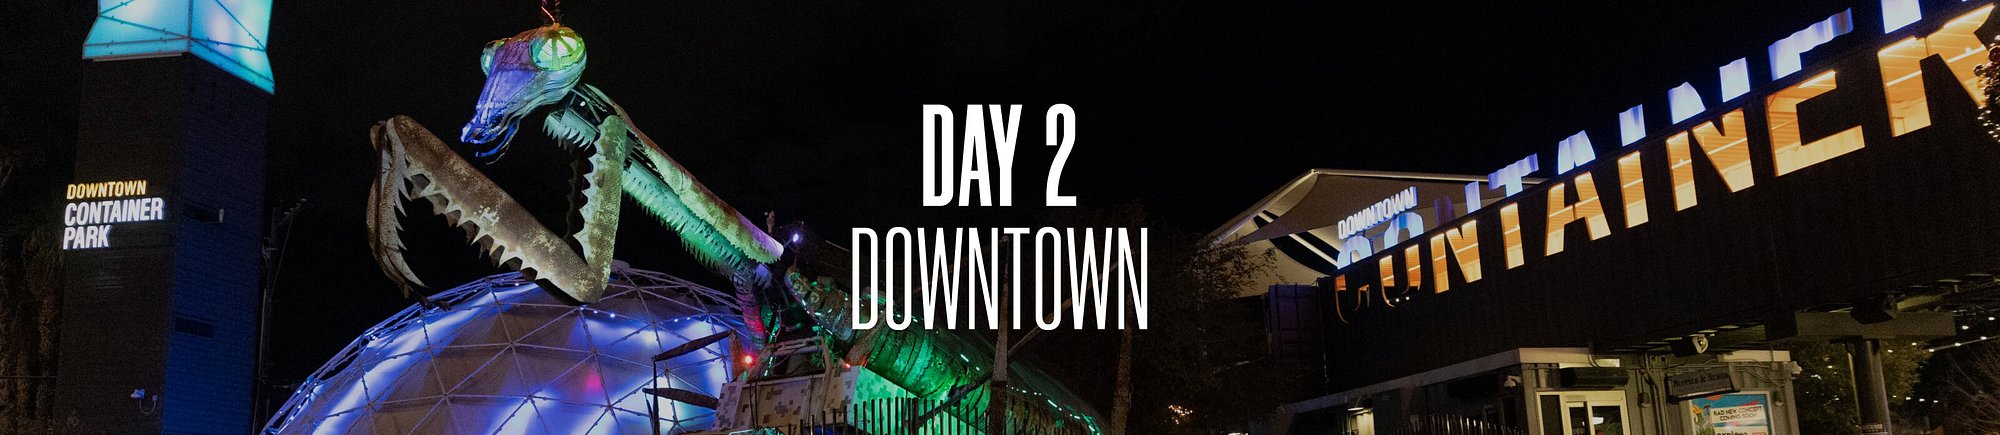 Day 2: Downtown 